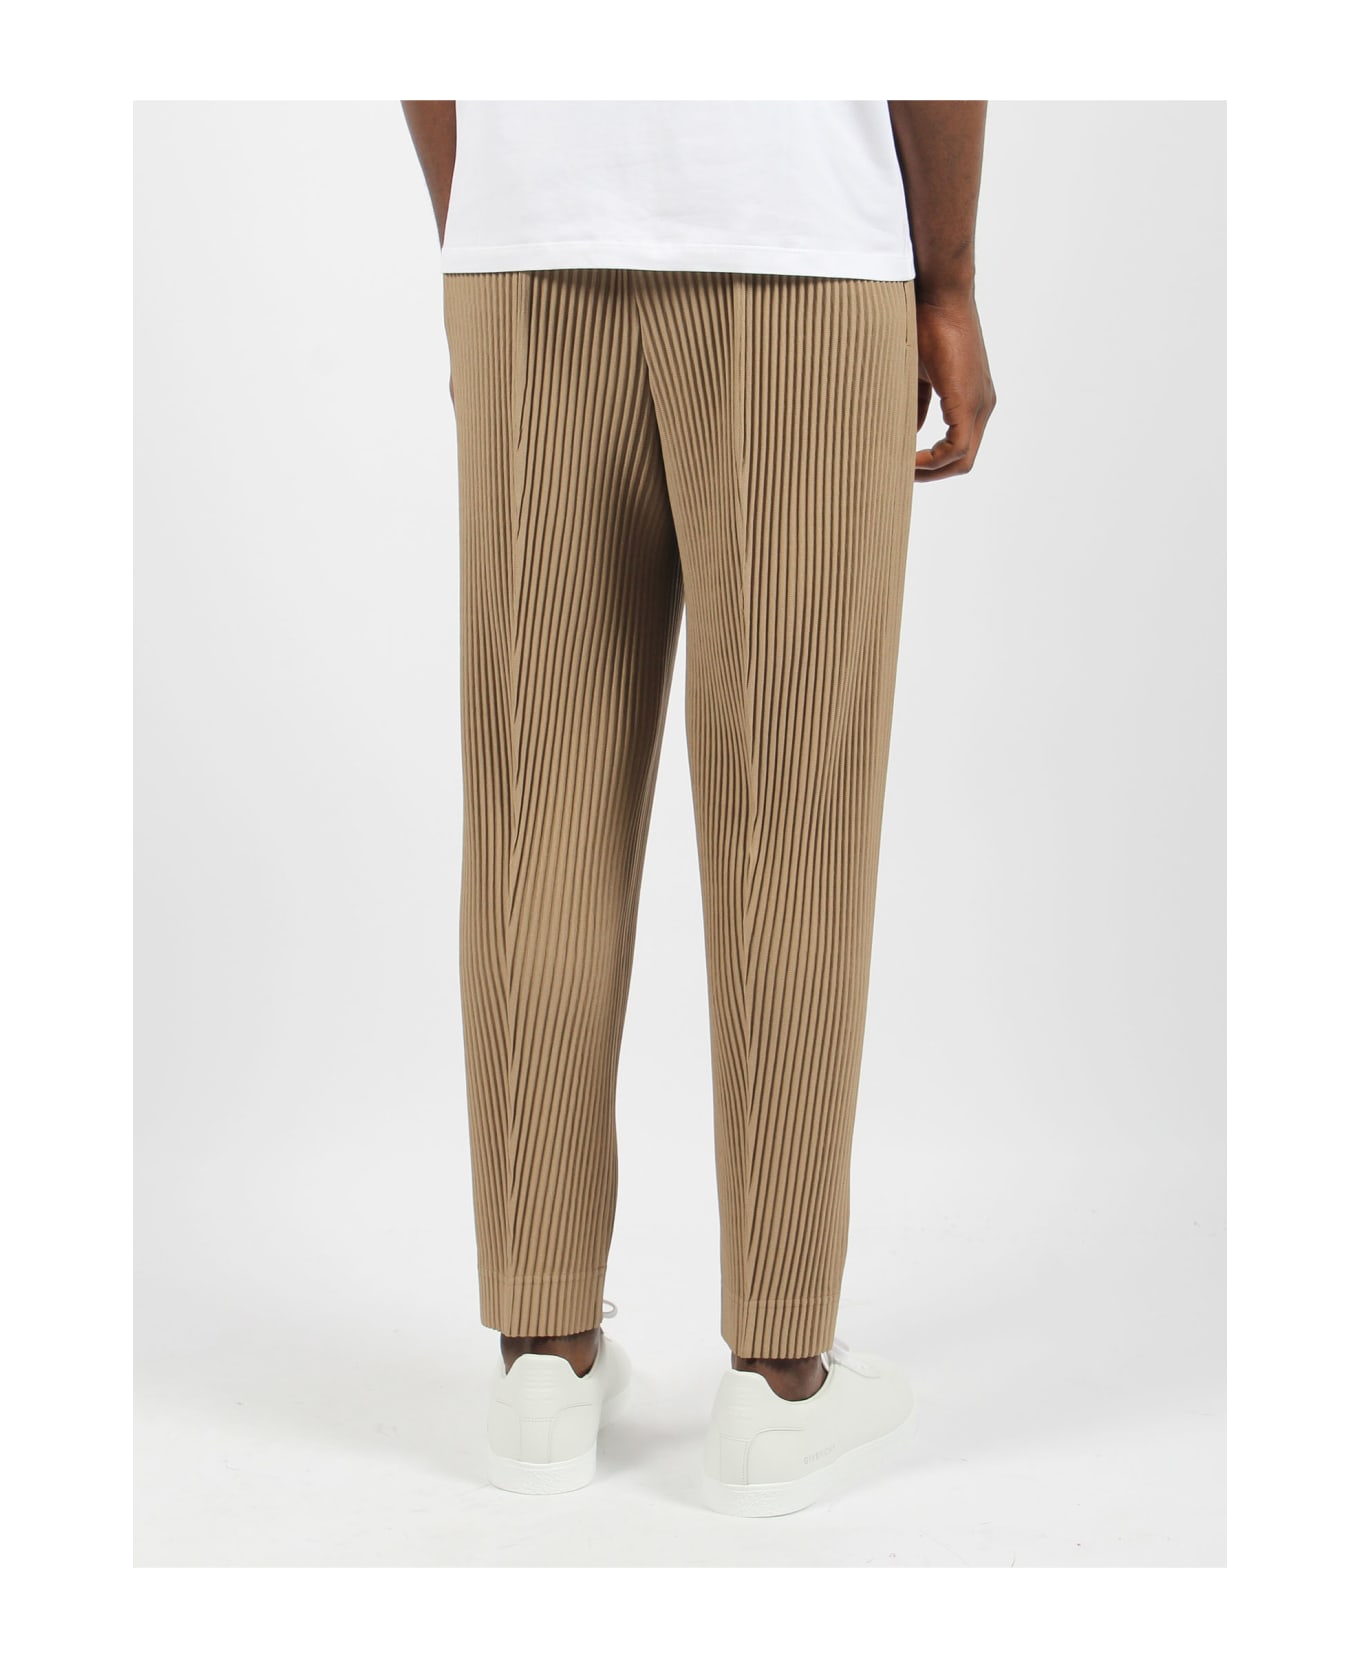 Homme Plissé Issey Miyake Compleat Trousers - Brown ボトムス